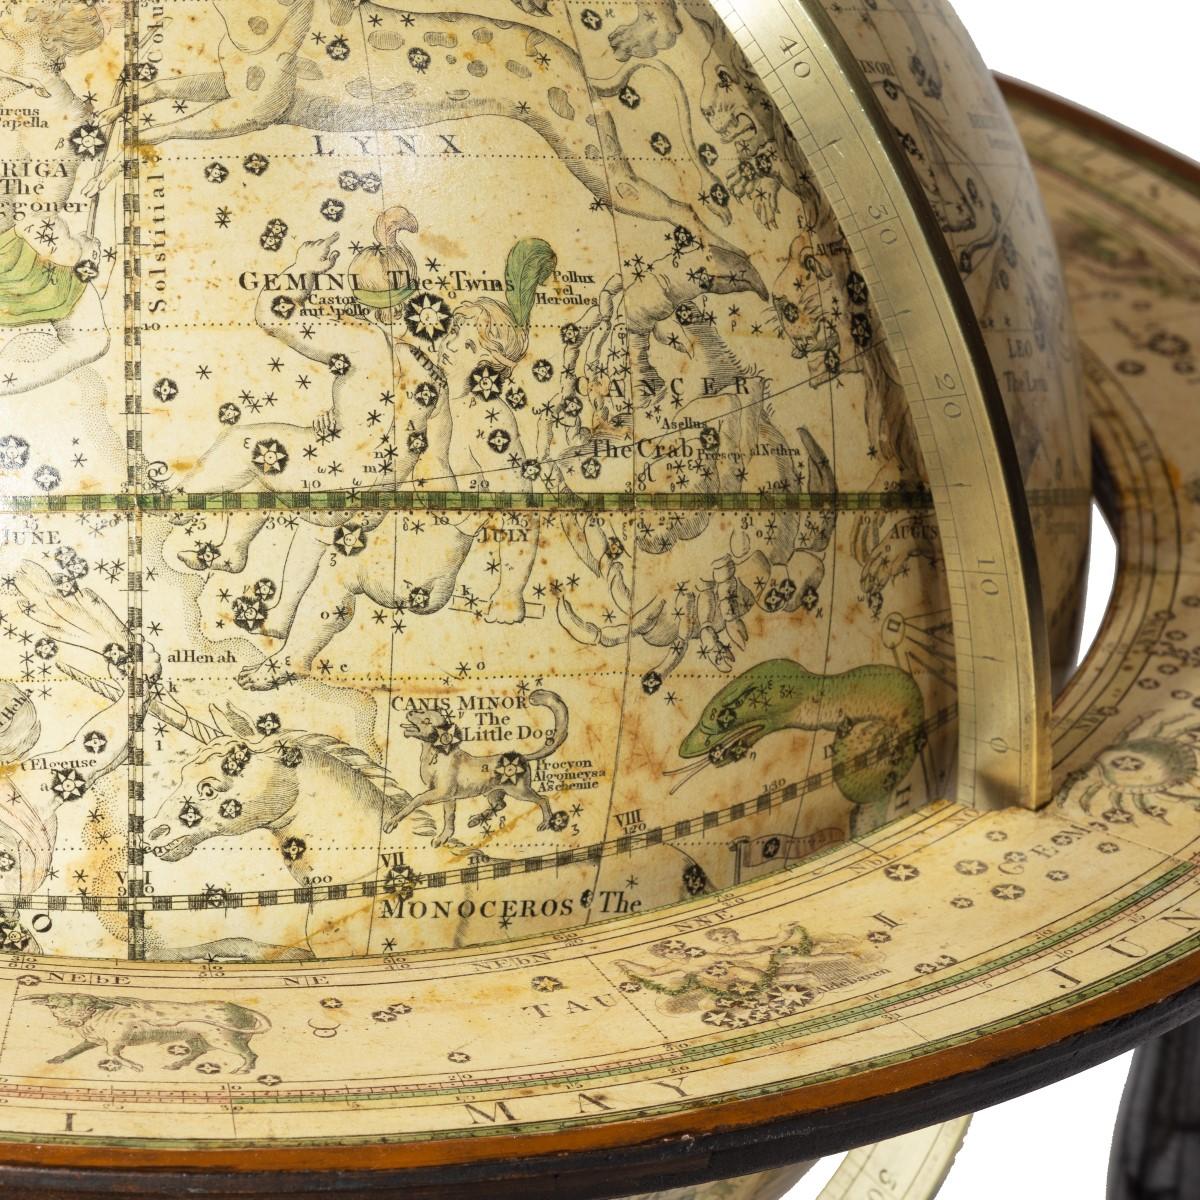 A 12 inch celestial table globe by Harris and Son